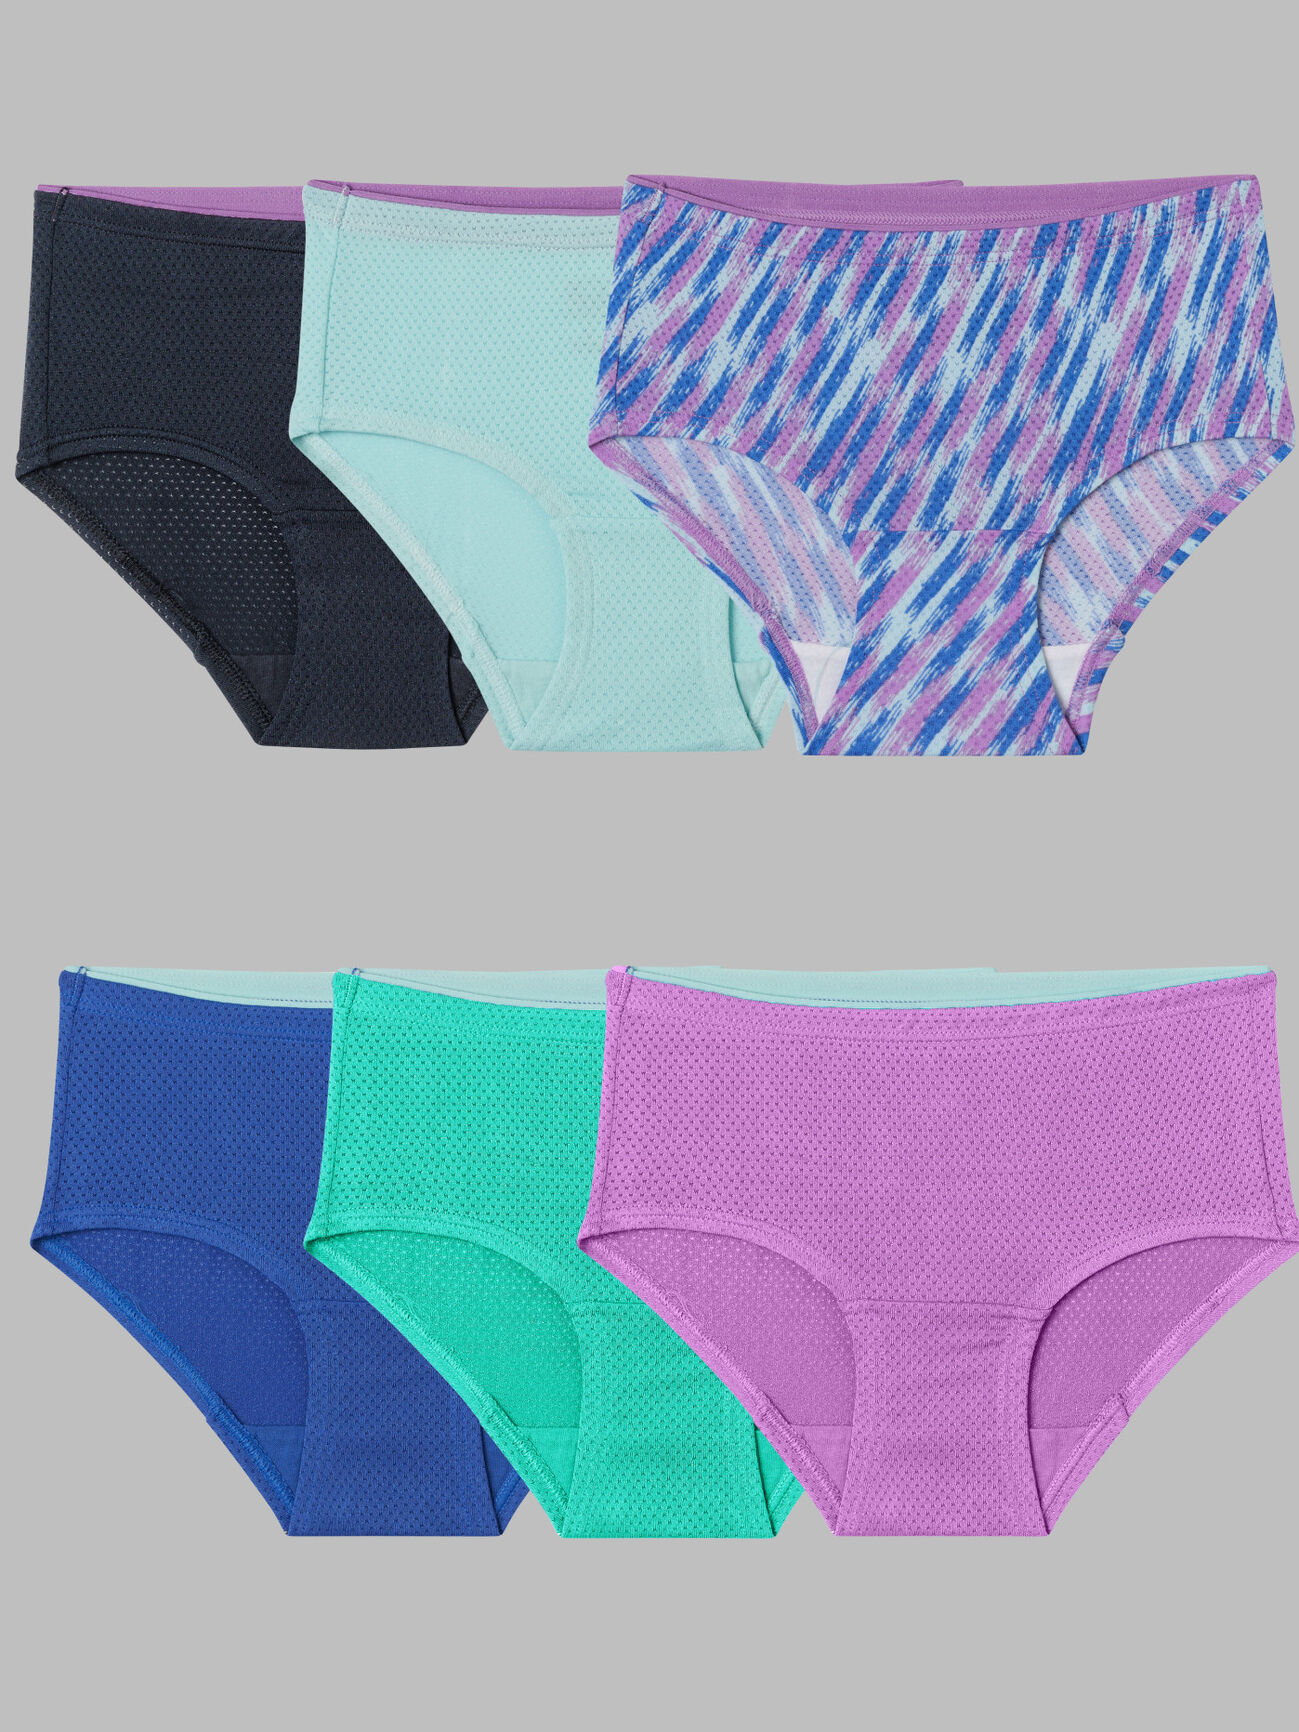 Teen Girls Underwear 7 Pack Briefs/Pants/Knickers One Size To Fit